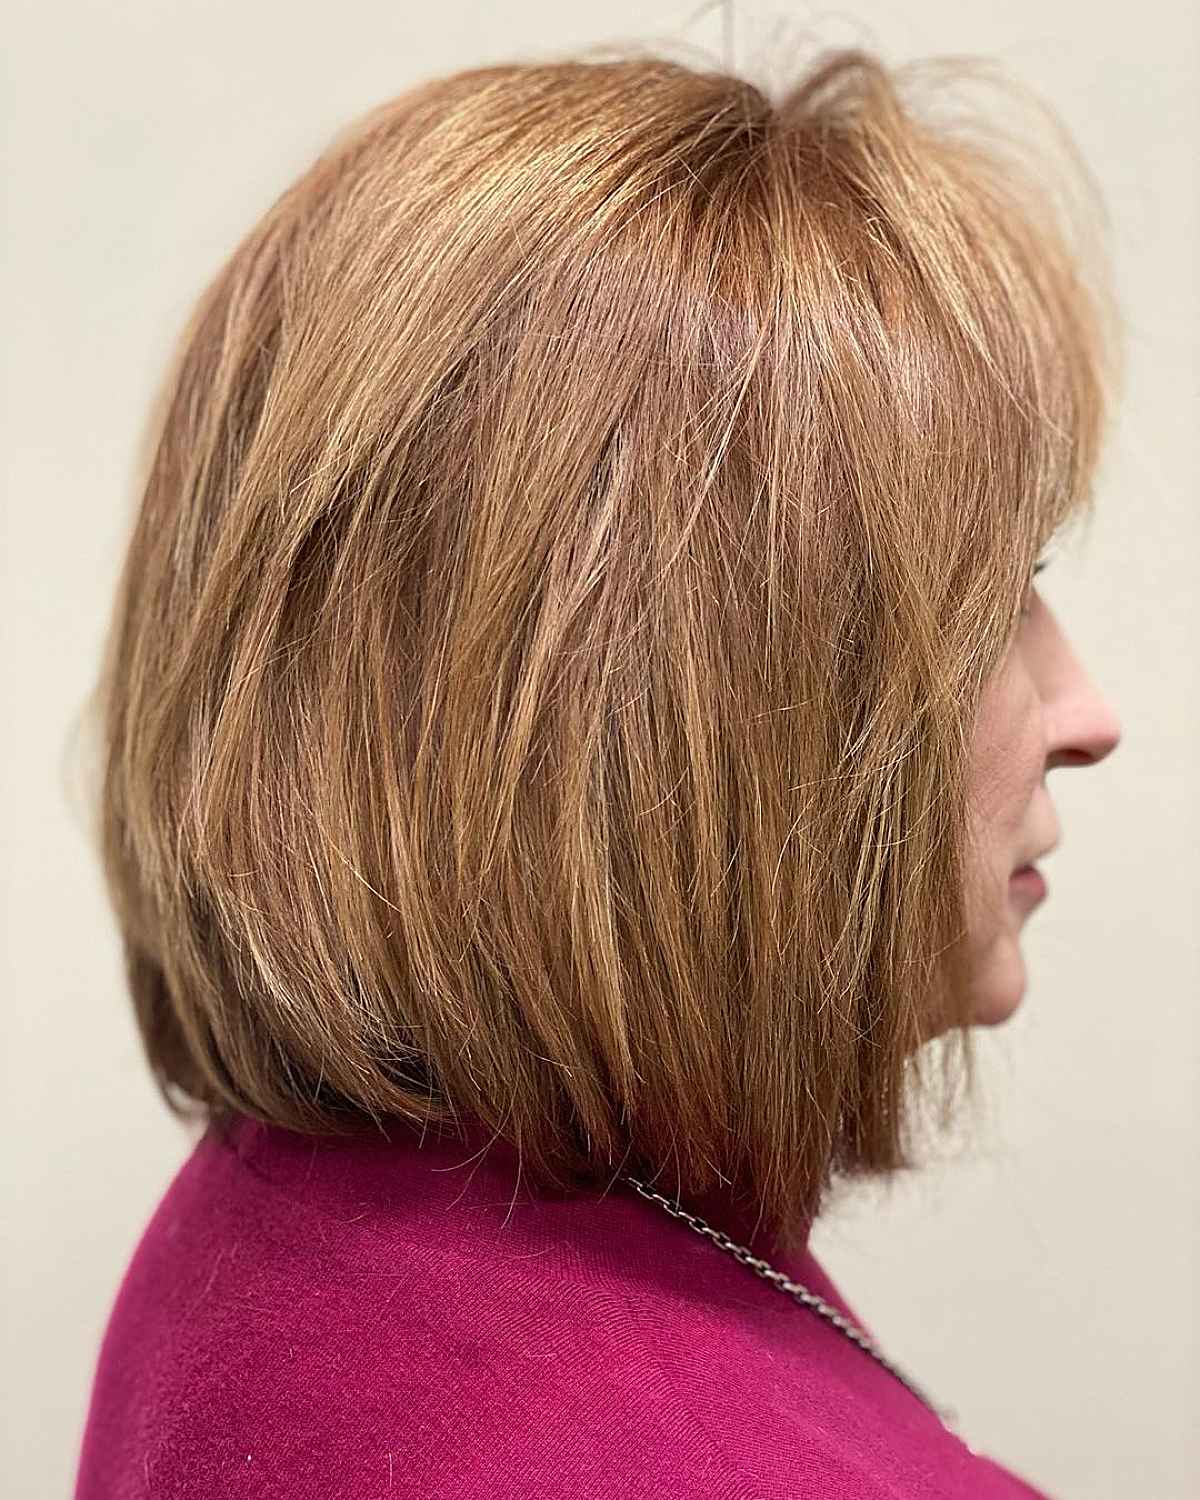 Thick Bob Cut with Choppy Layers